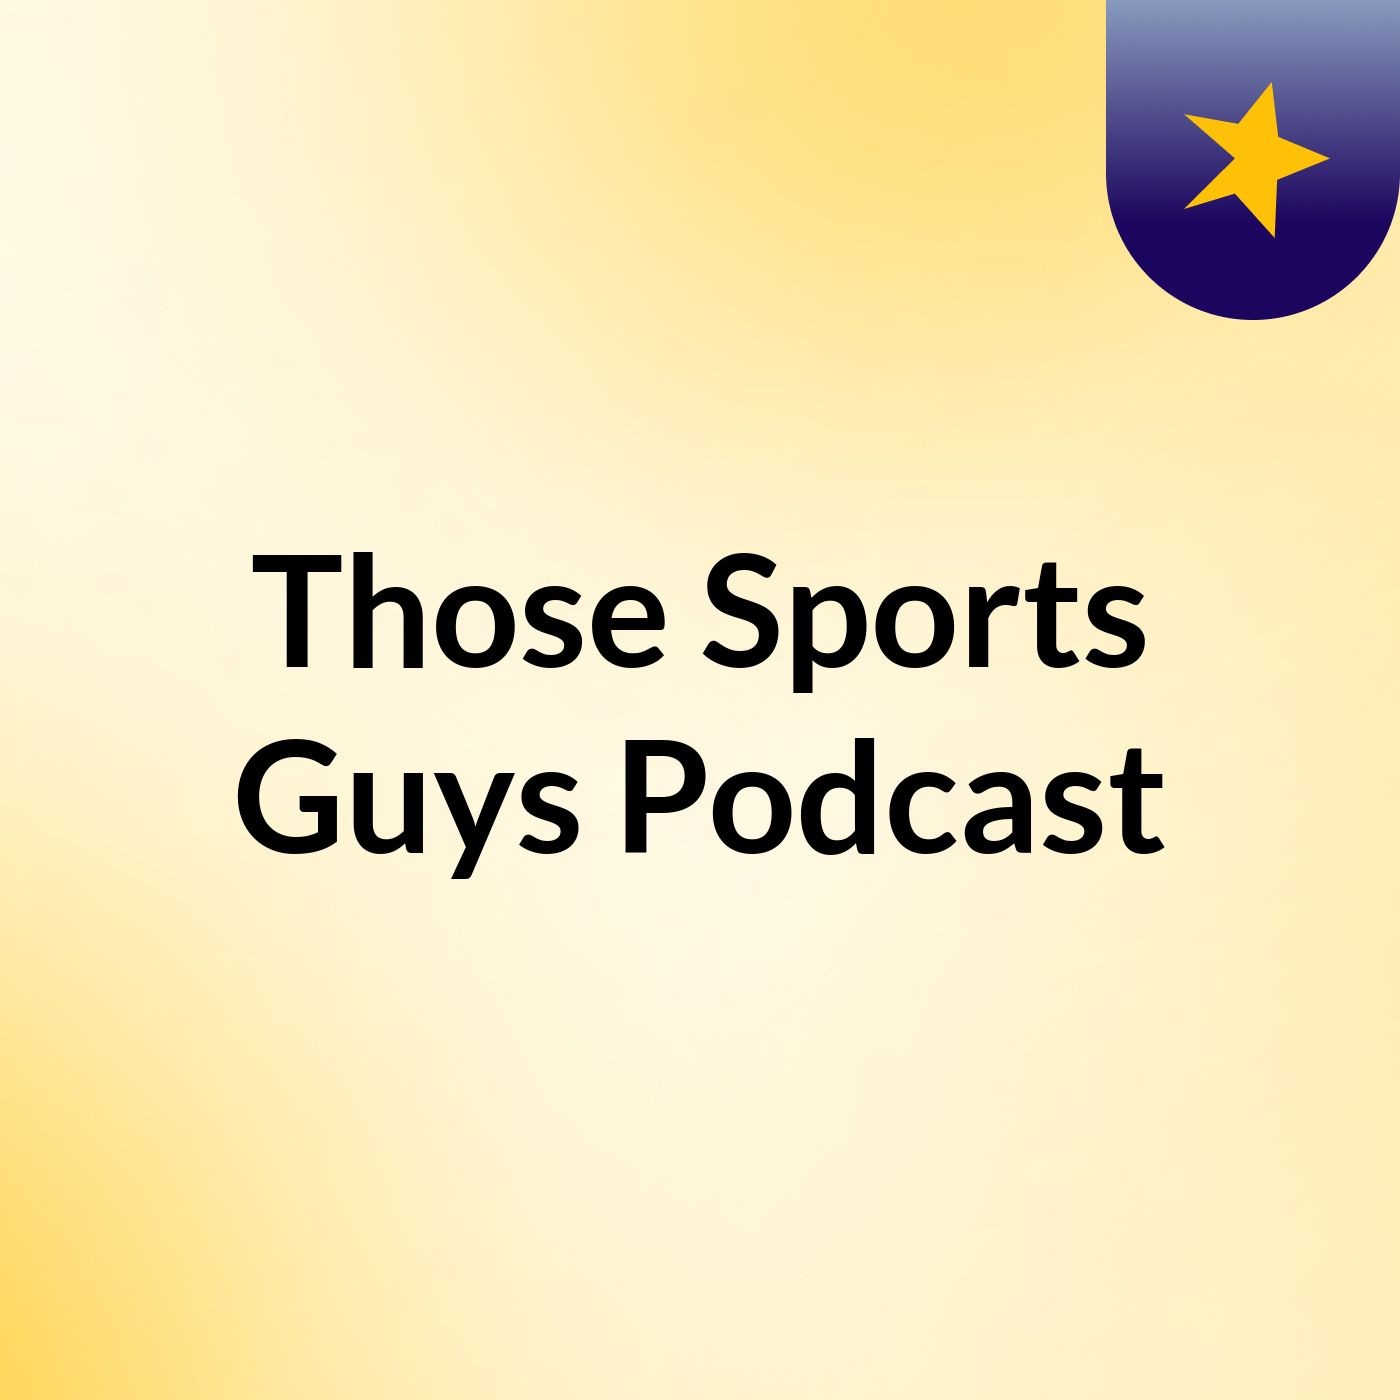 Those Sports Guys: Podcast #10 8/30